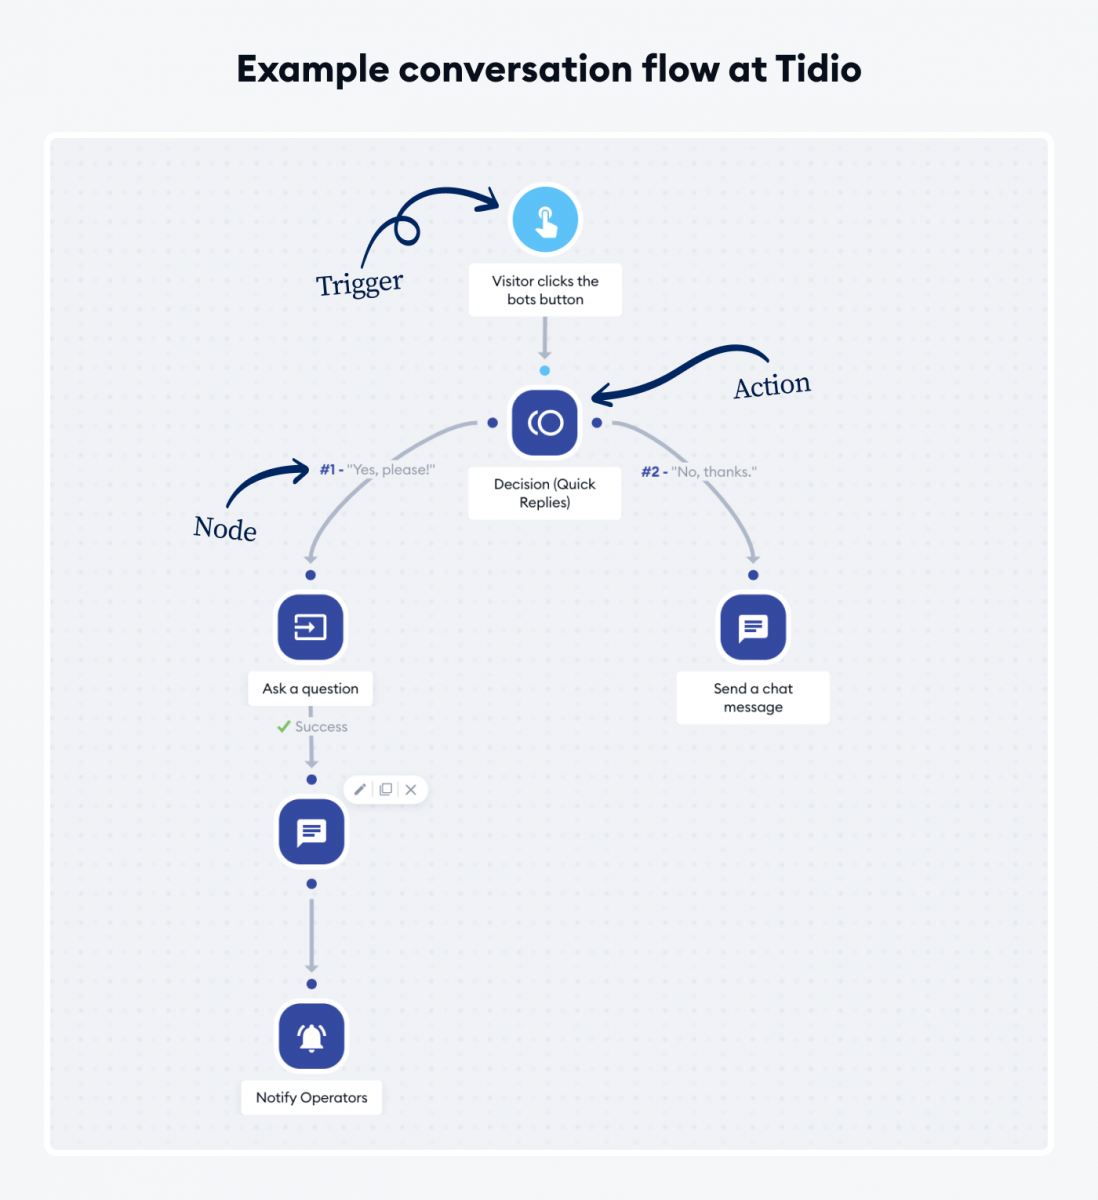 An infographic showing an example conversation flow at Tidio